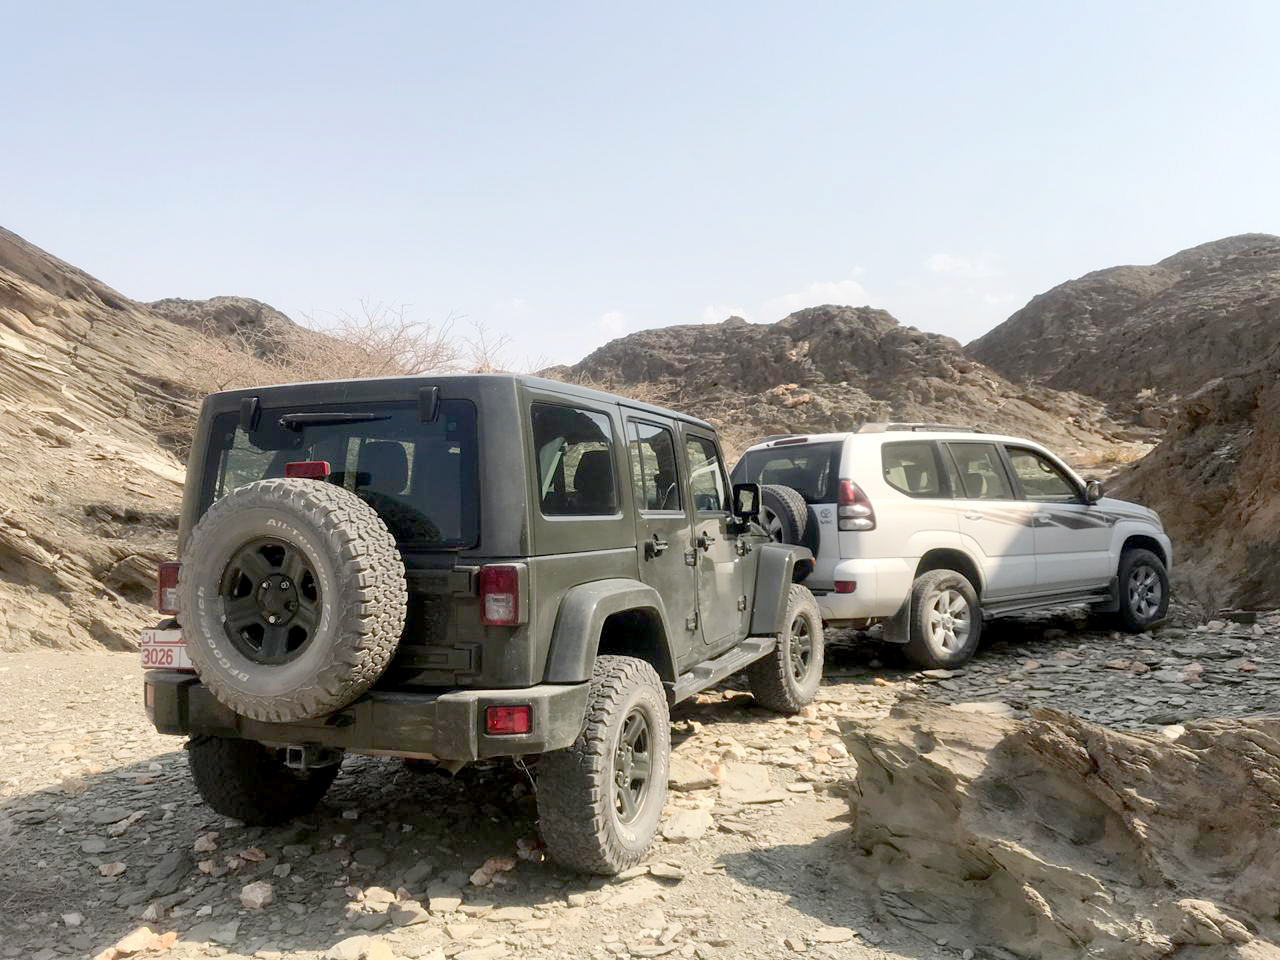 Poachers shoot at Oman government officials in nature reserve